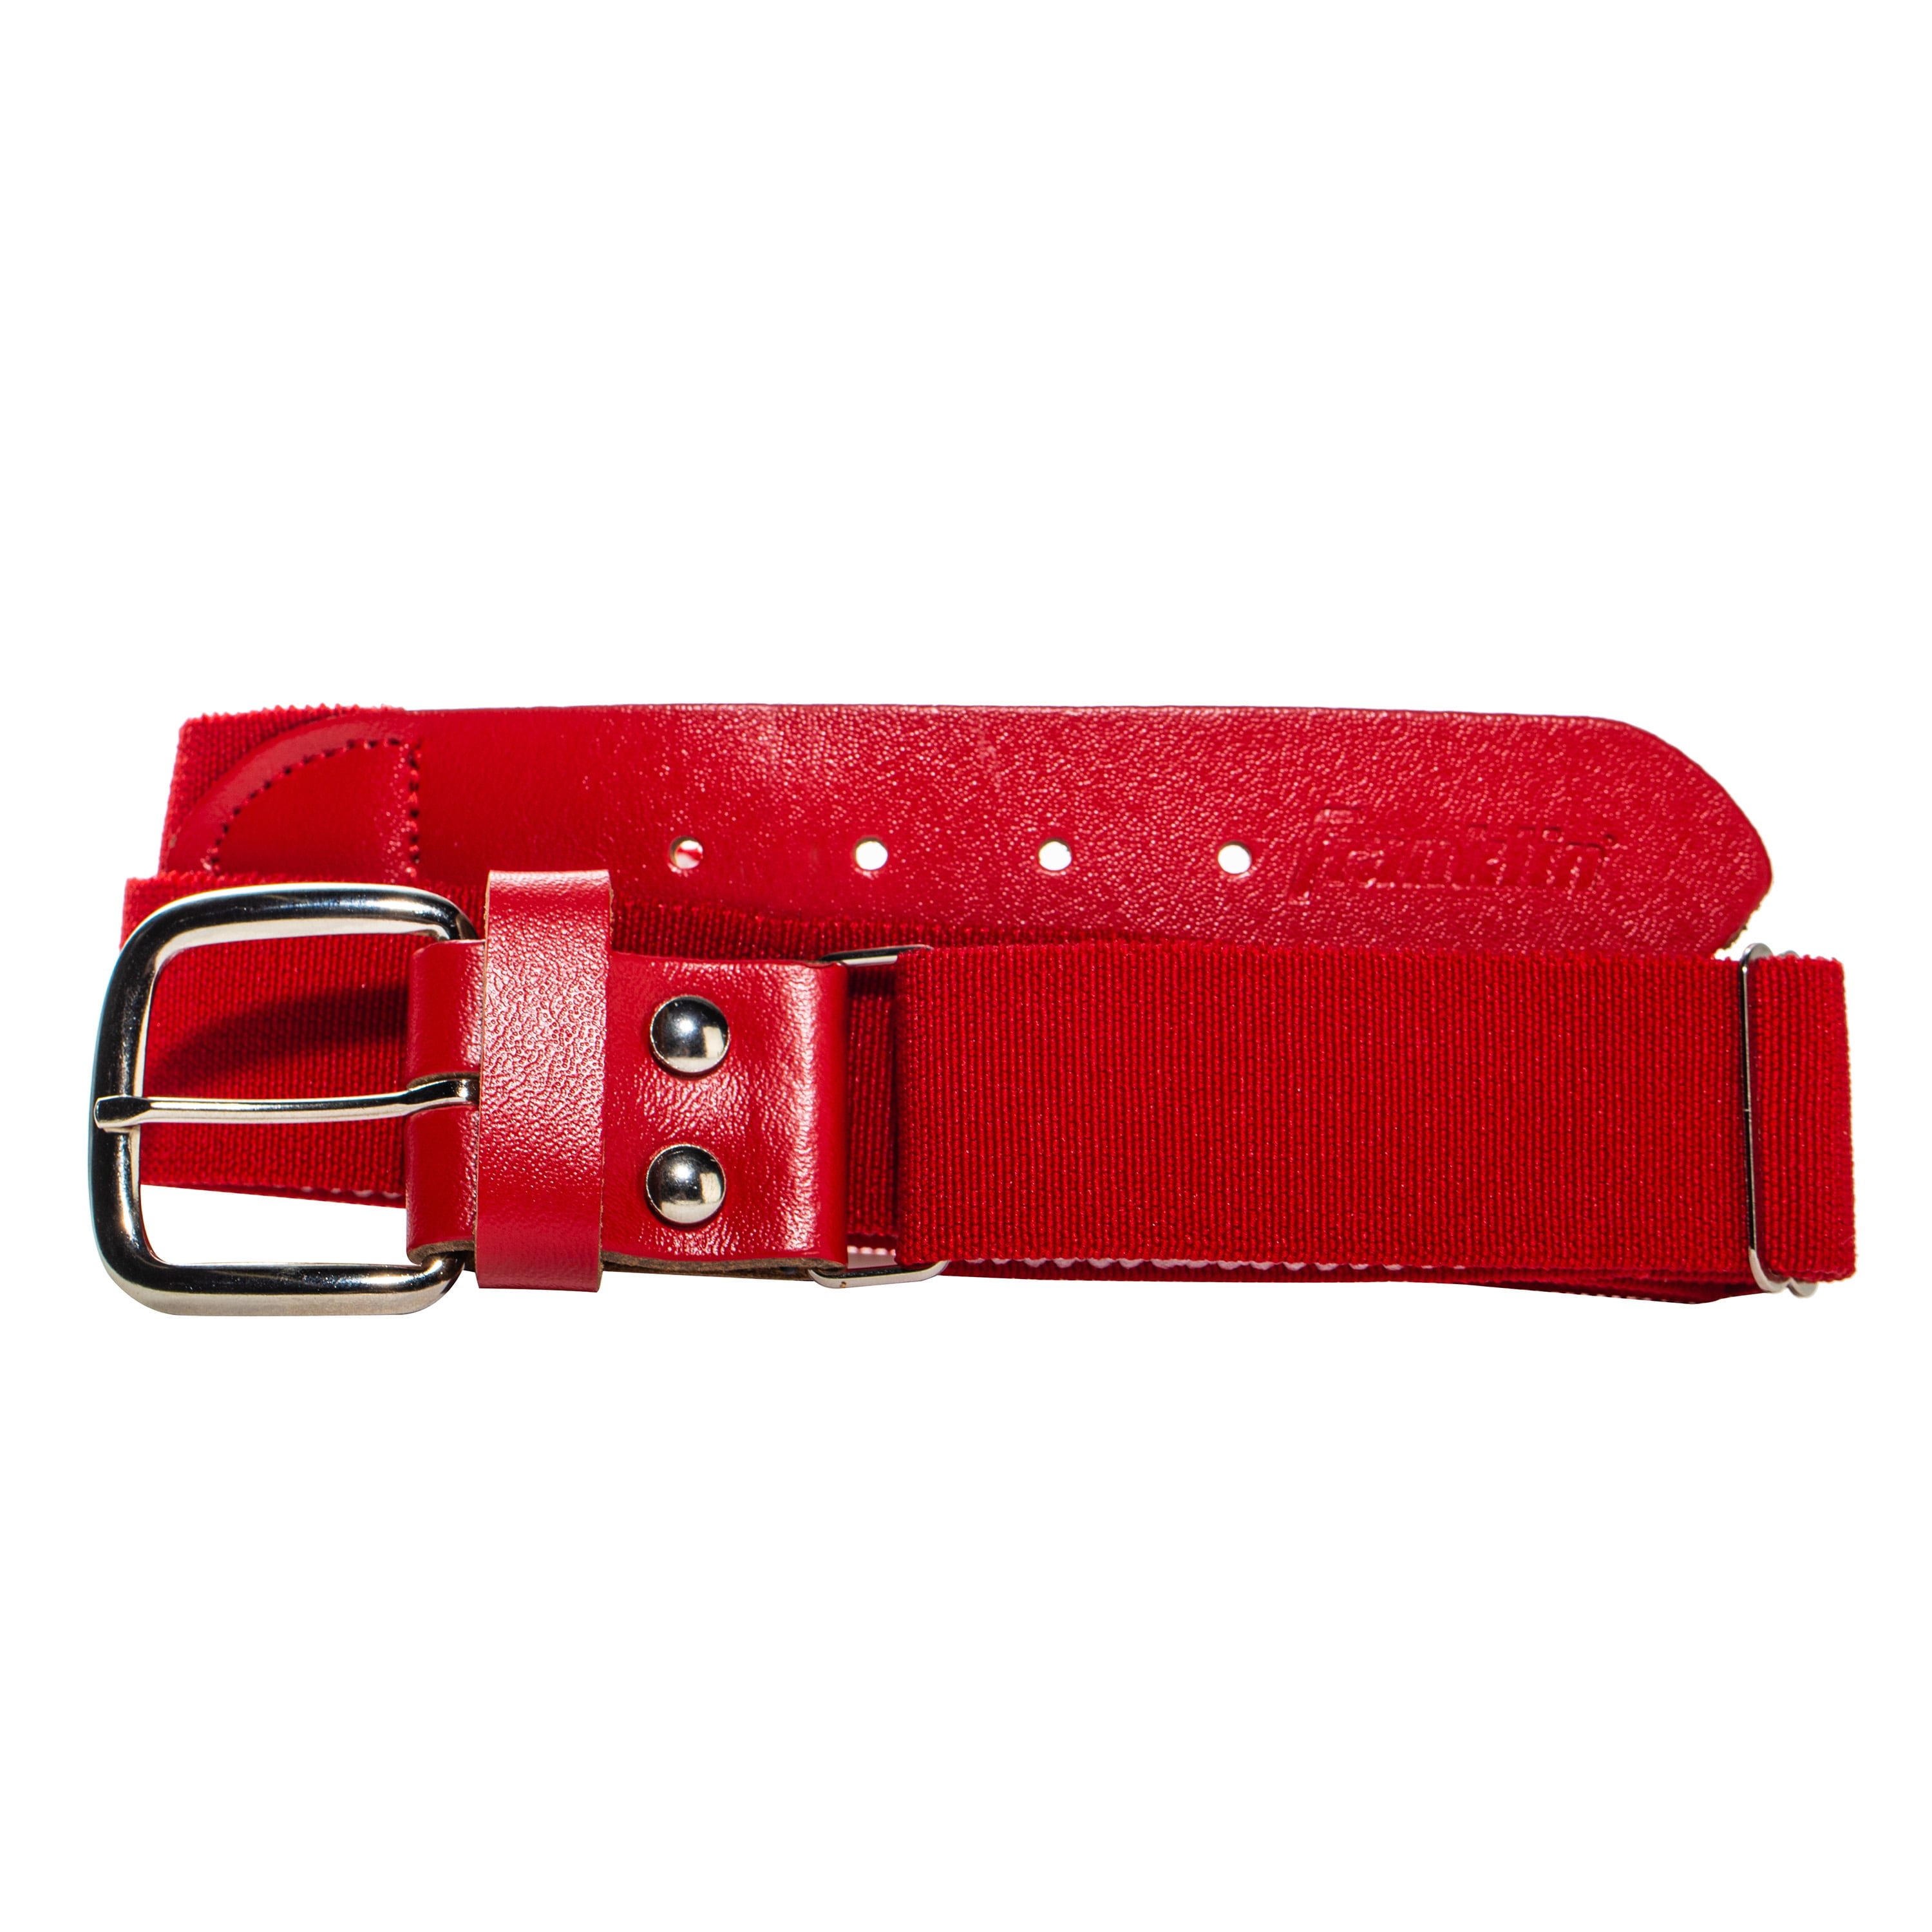 New Adjustable Baseball Belt in your Color and Size! 